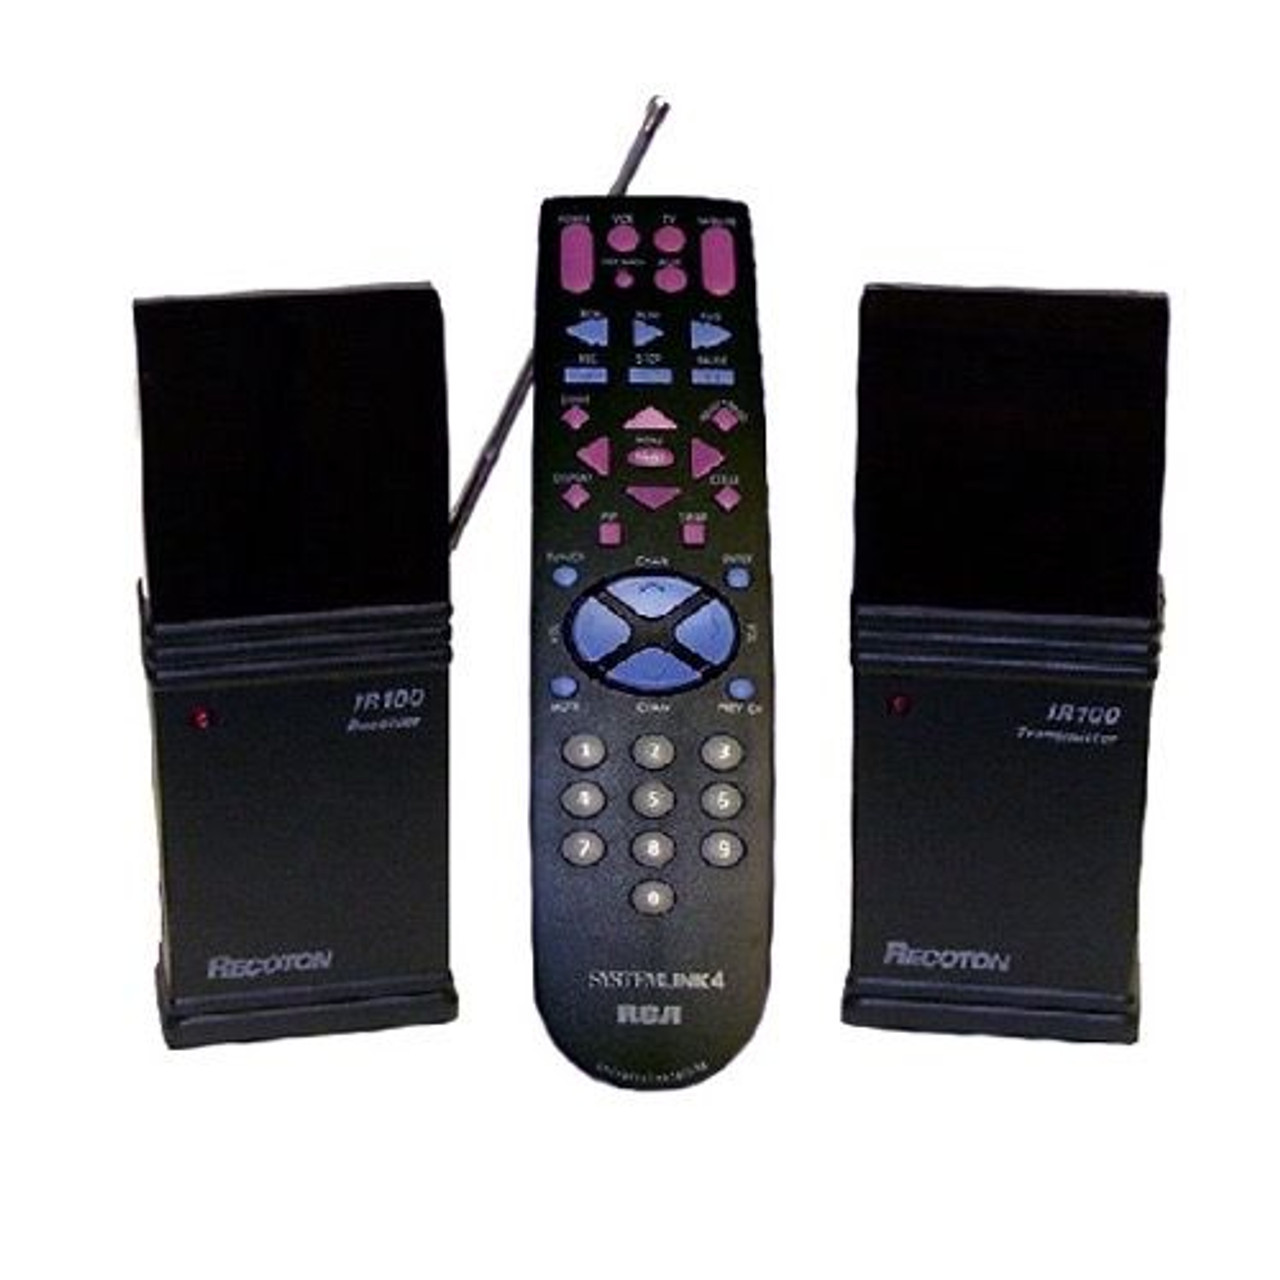 Wireless Remote Control Extender and Universal 4 Device Remote Control RCA Systemlink 4 Remote TV System Control, Remote Range RF Frequency 418 MHz, Part # WIRRCA